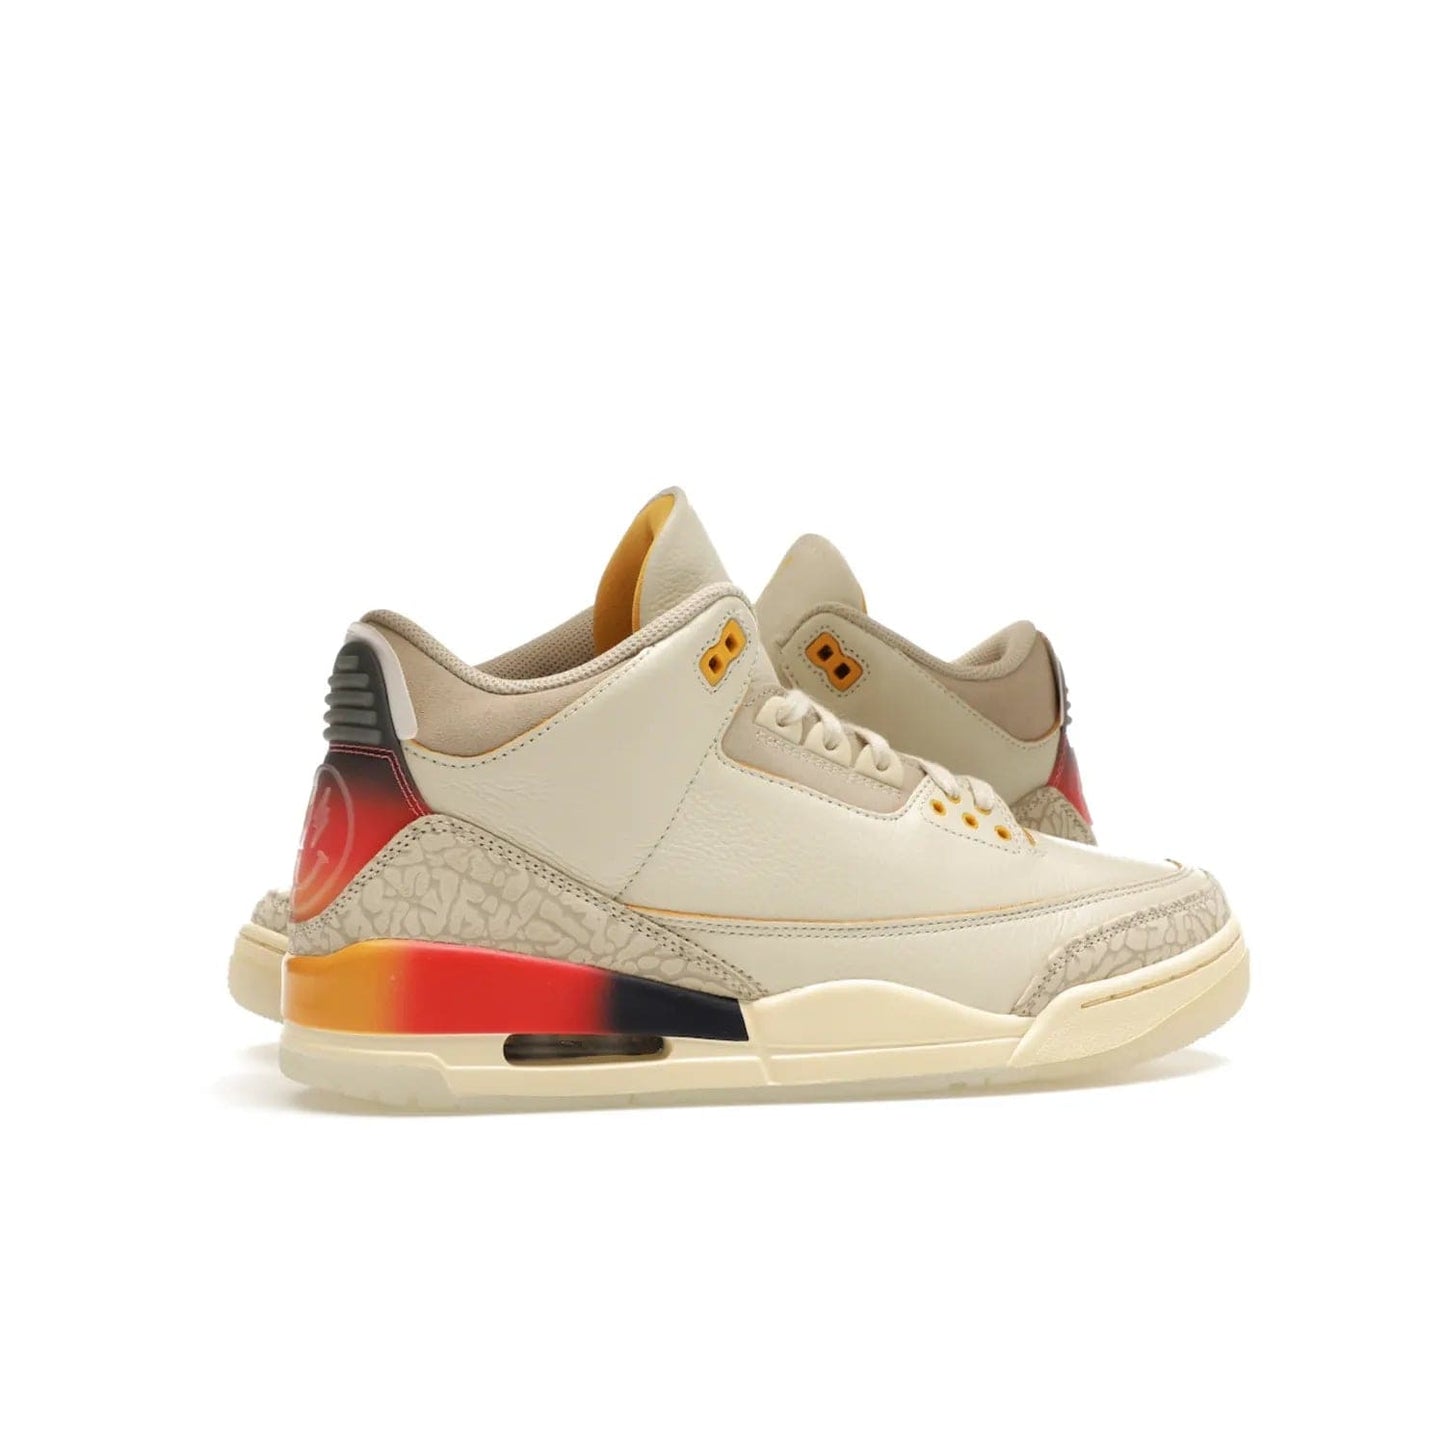 Jordan 3 Retro SP J Balvin Medellín Sunset - Image 35 - Only at www.BallersClubKickz.com - J Balvin x Jordan 3 Retro SP: Celebrate the joy of life with a colorful, homage to the electrifying reggaeton culture and iconic Jordan 3. Limited edition, Sept. 23. $250.